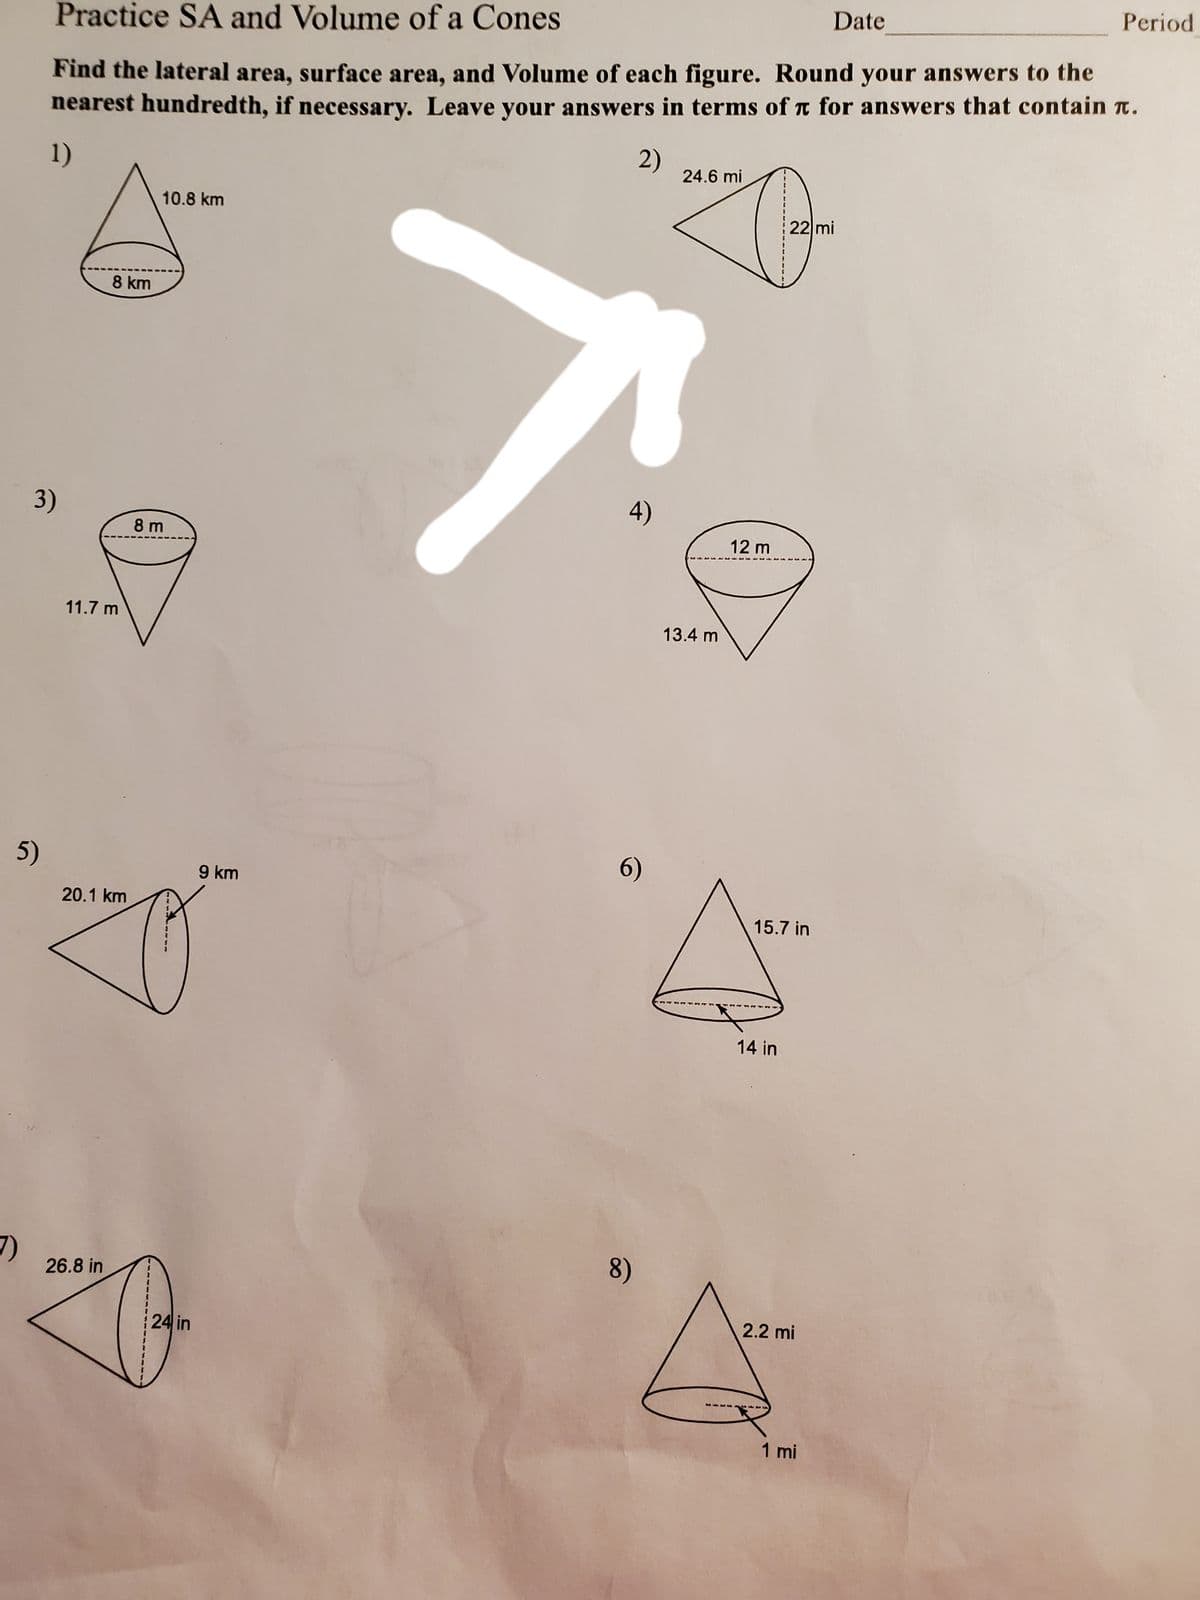 Practice SA and Volume of a Cones
Date
Period
Find the lateral area, surface area, and Volume of each figure. Round your answers to the
nearest hundredth, if necessary. Leave your answers in terms of t for answers that contain n.
1)
2)
24.6 mi
10.8 km
22 mi
8 km
3)
4)
8 m
12 m
11.7 m
13.4 m
5)
9 km
6)
20.1 km
15.7 in
14 in
26.8 in
8)
24 in
2.2 mi
1 mi
